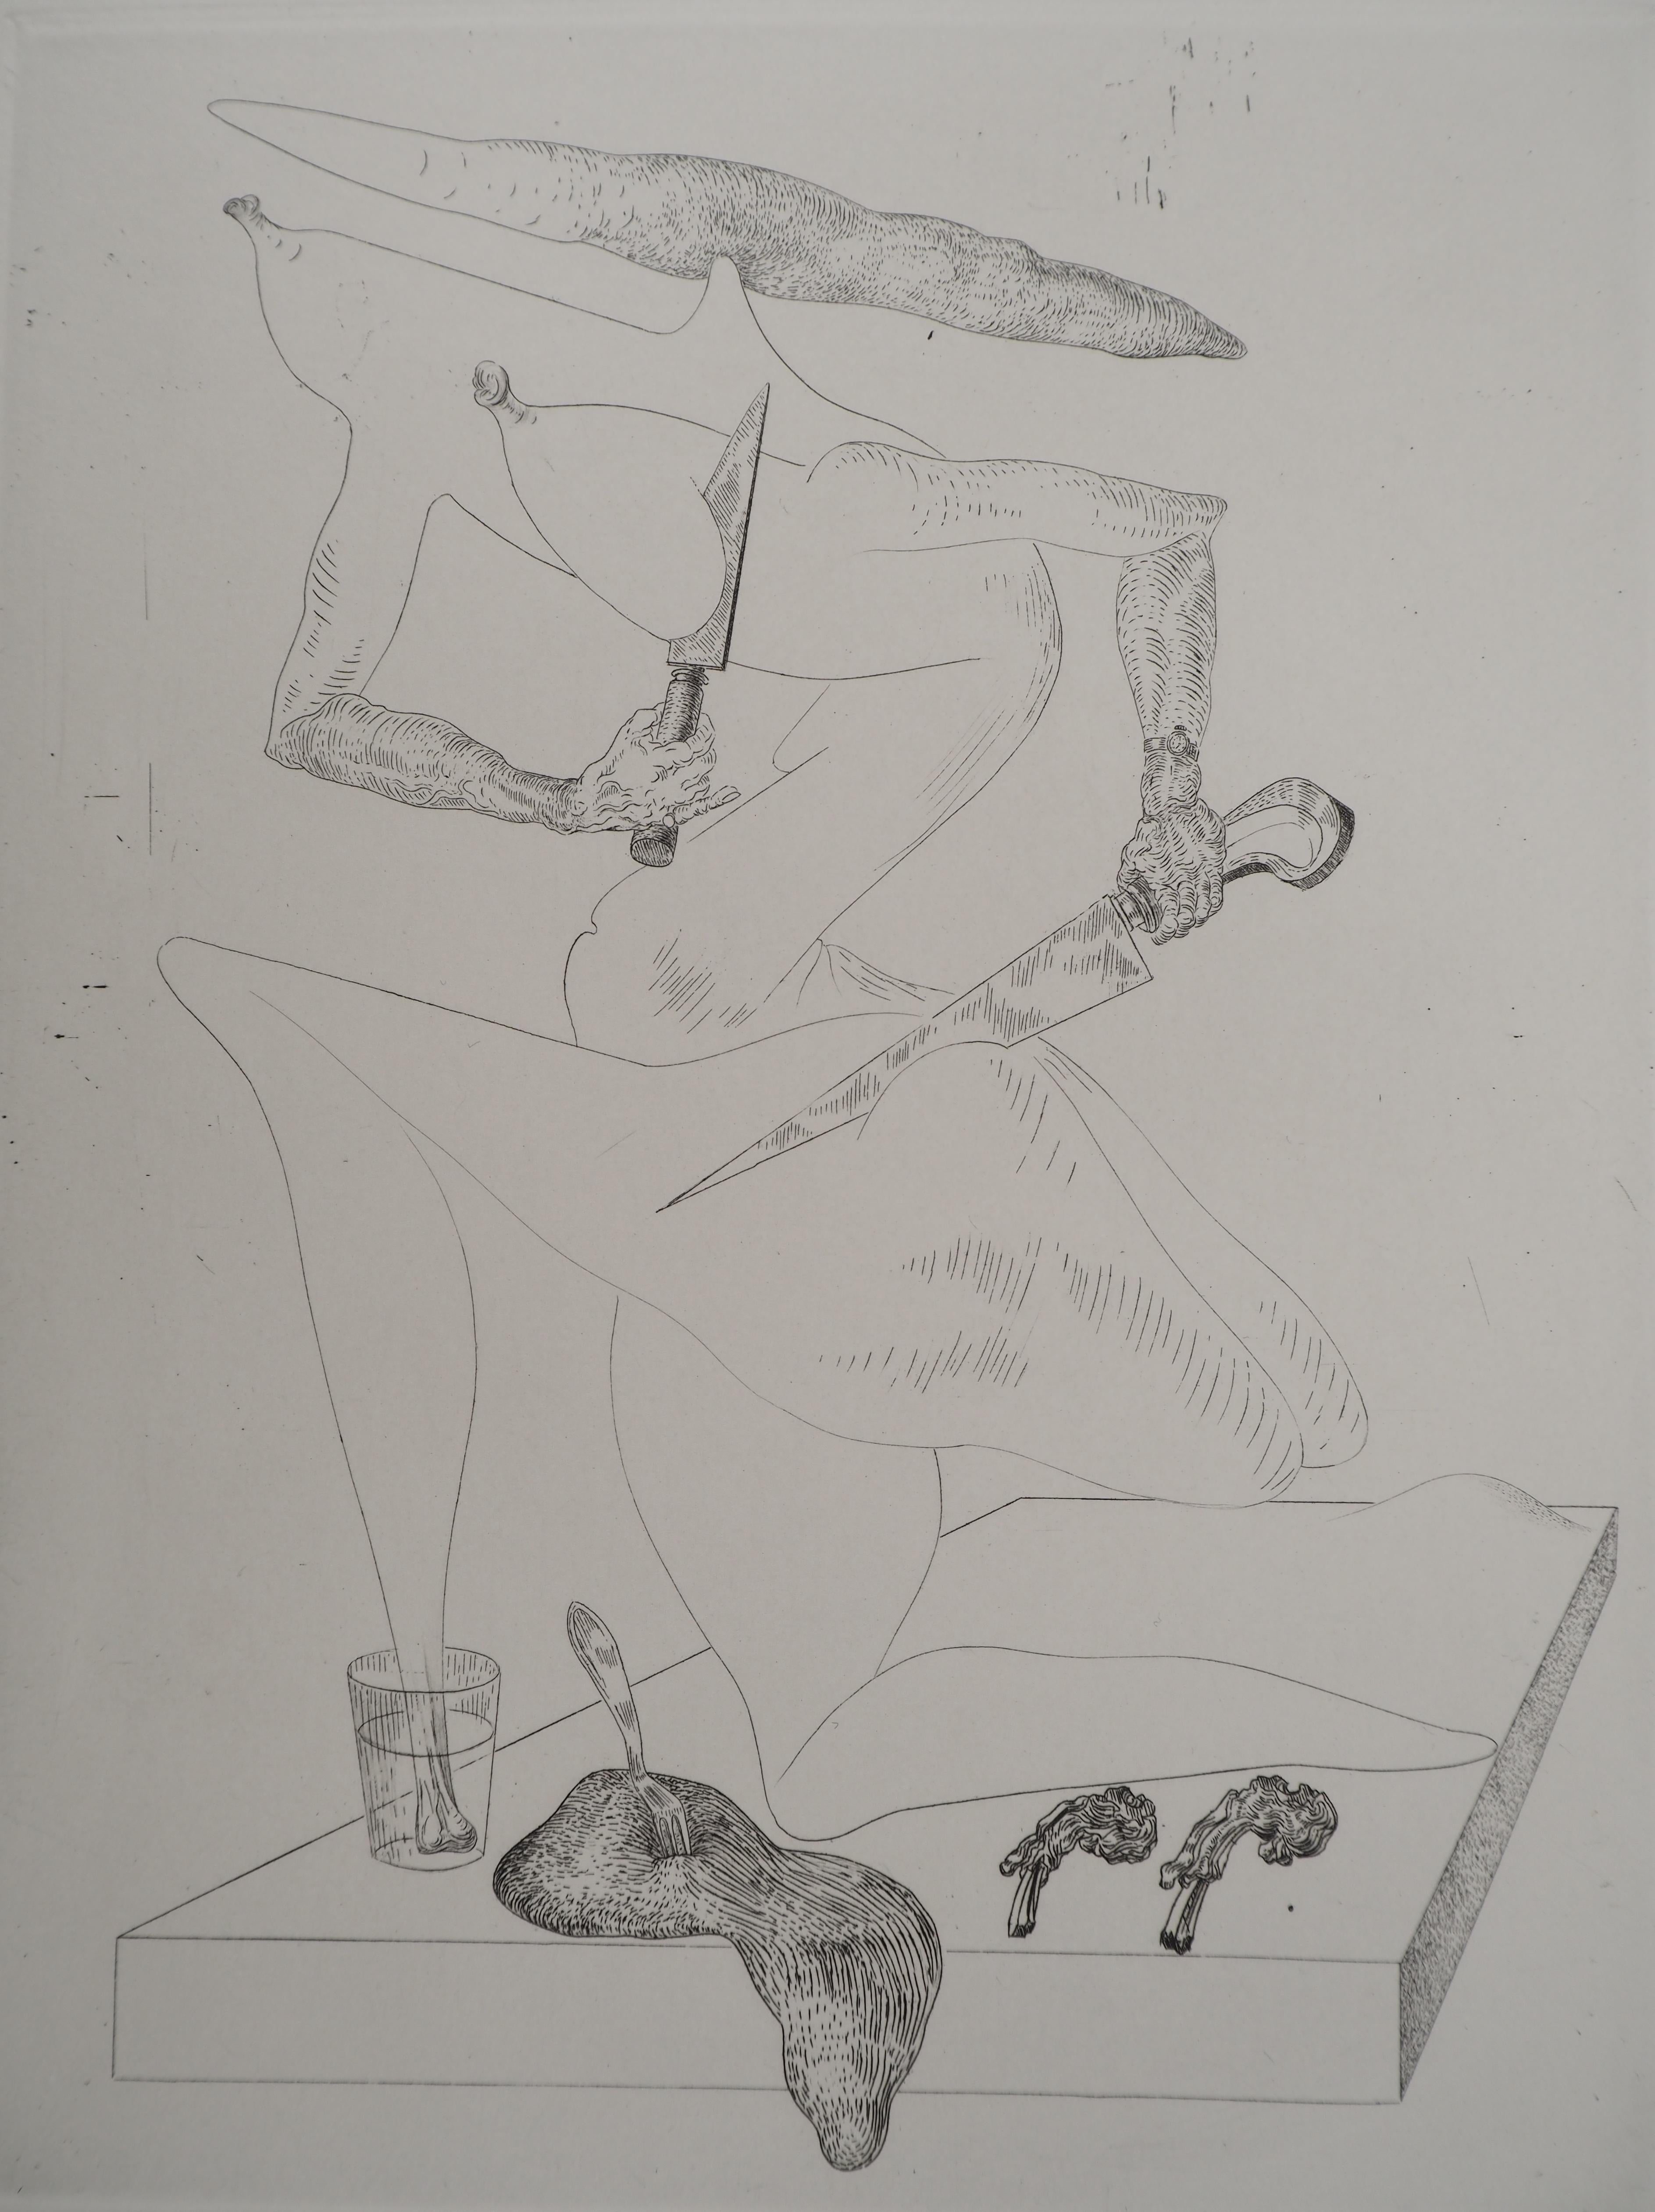 Salvador Dali
Making Dinner, 1975

Original etching 
Signed in pencil 
Limited to 100 copies (Here numbered 52)
On Arches vellum  32.5 x 25 cm (c. 12.7 x 9.8 in)

REFERENCES :
- Catalog raisonne Field #34-2
- Catalog raisonne Michler & Lopsinger